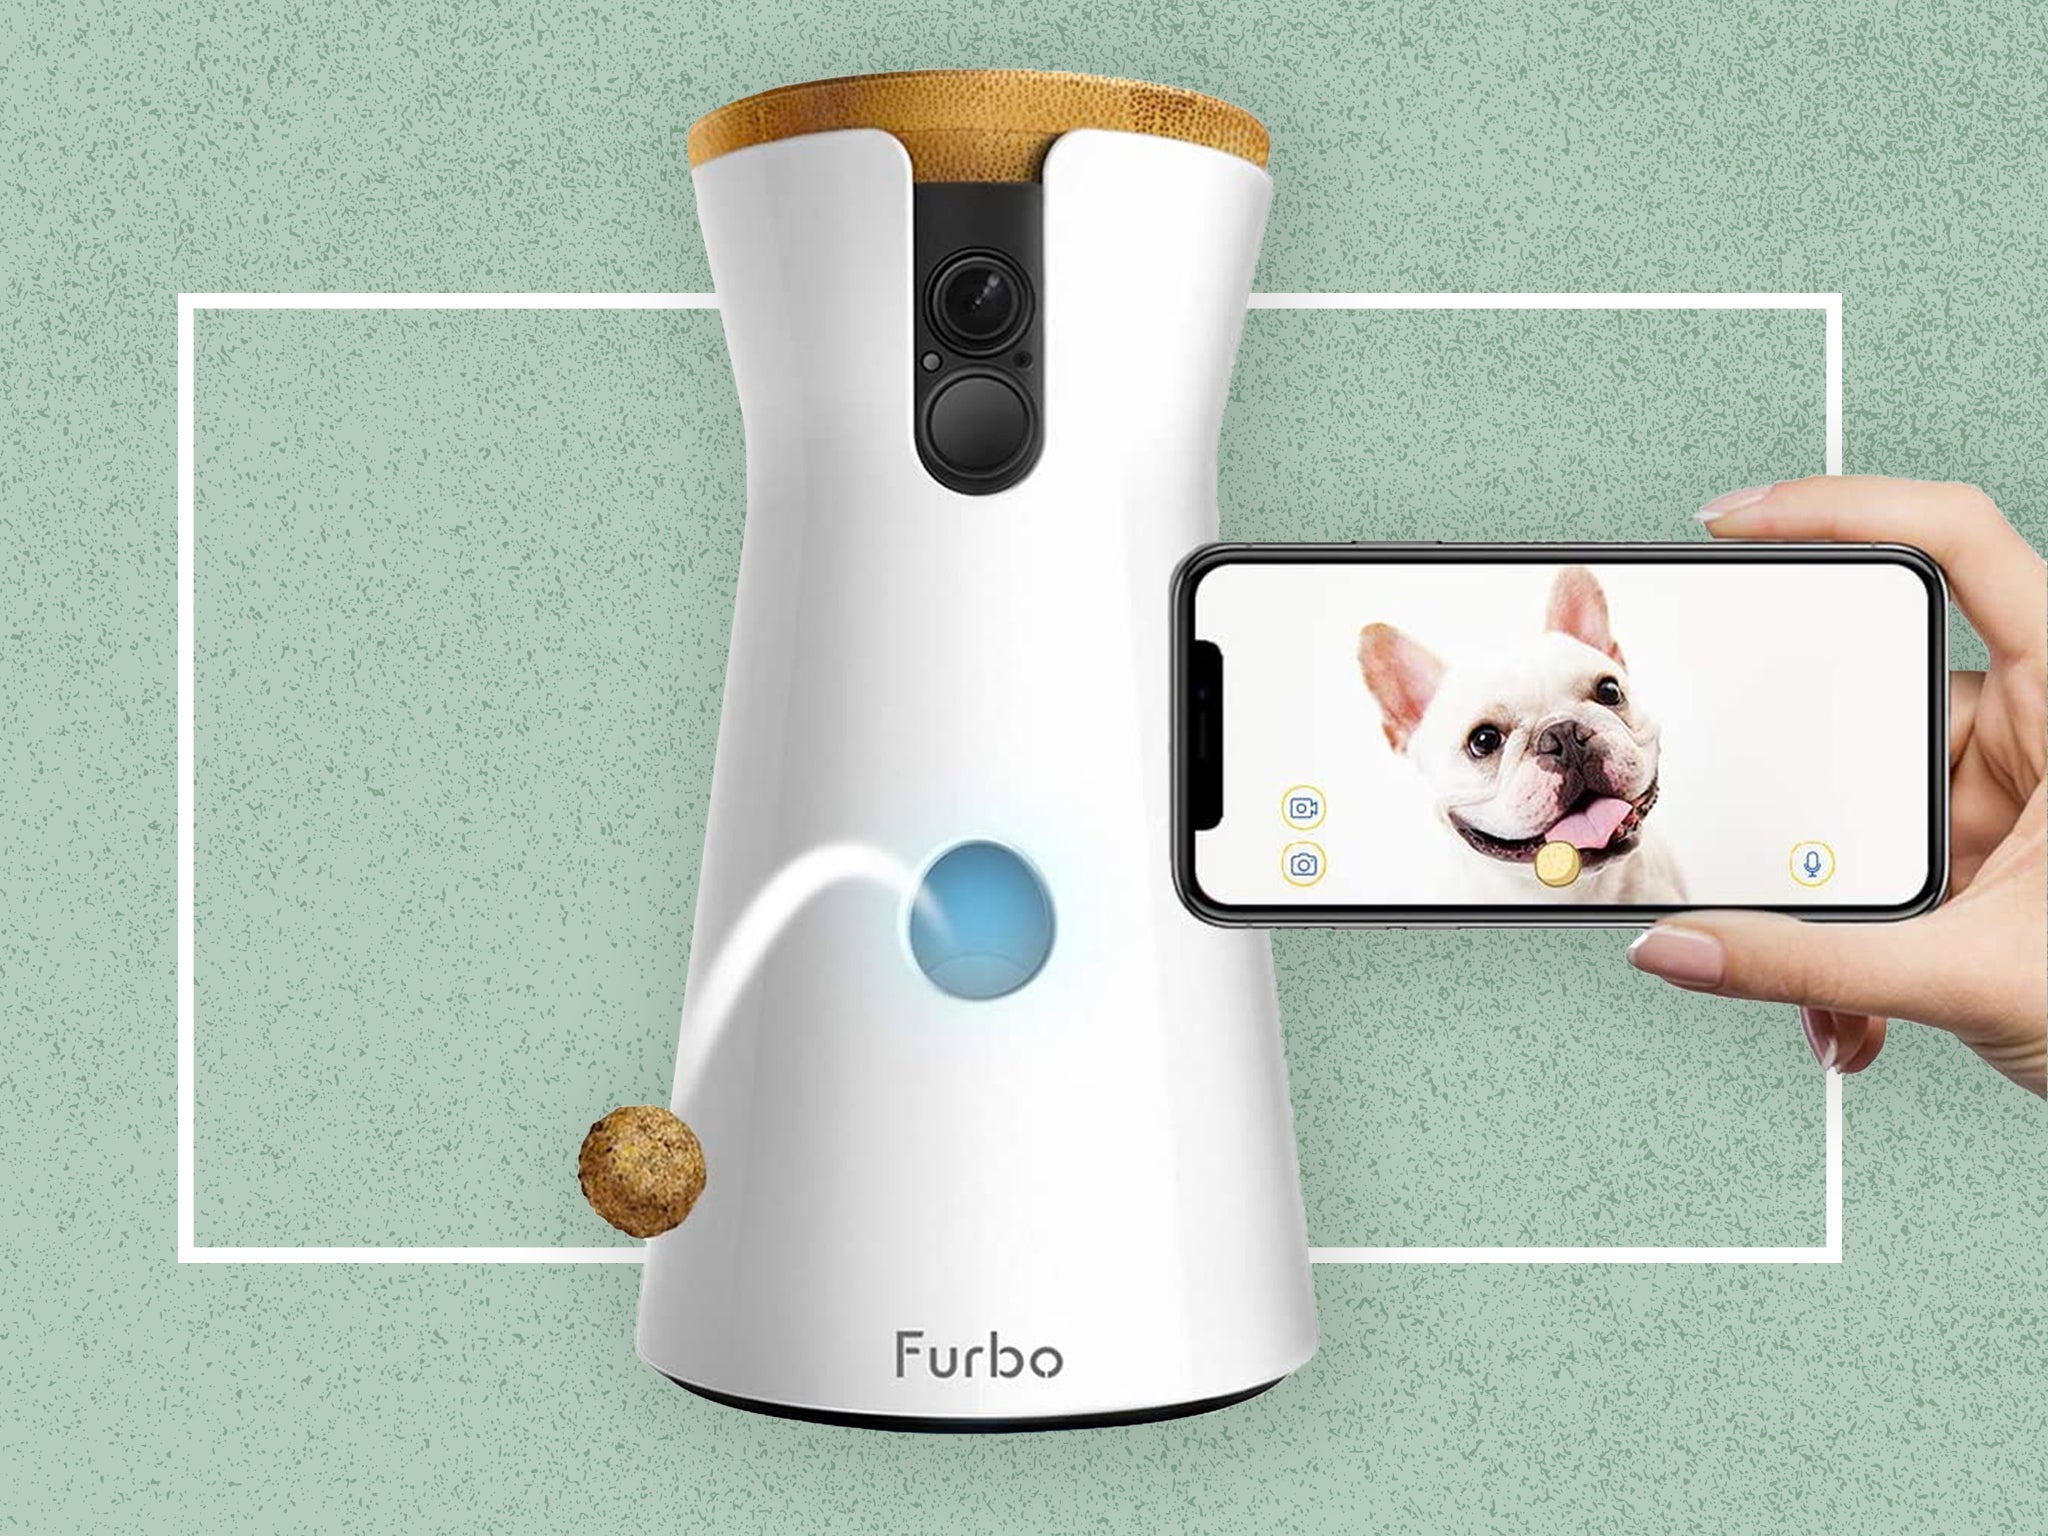 You can now save £116 on this dog camera device that allows you to see all your dog’s movements when you’re not at home